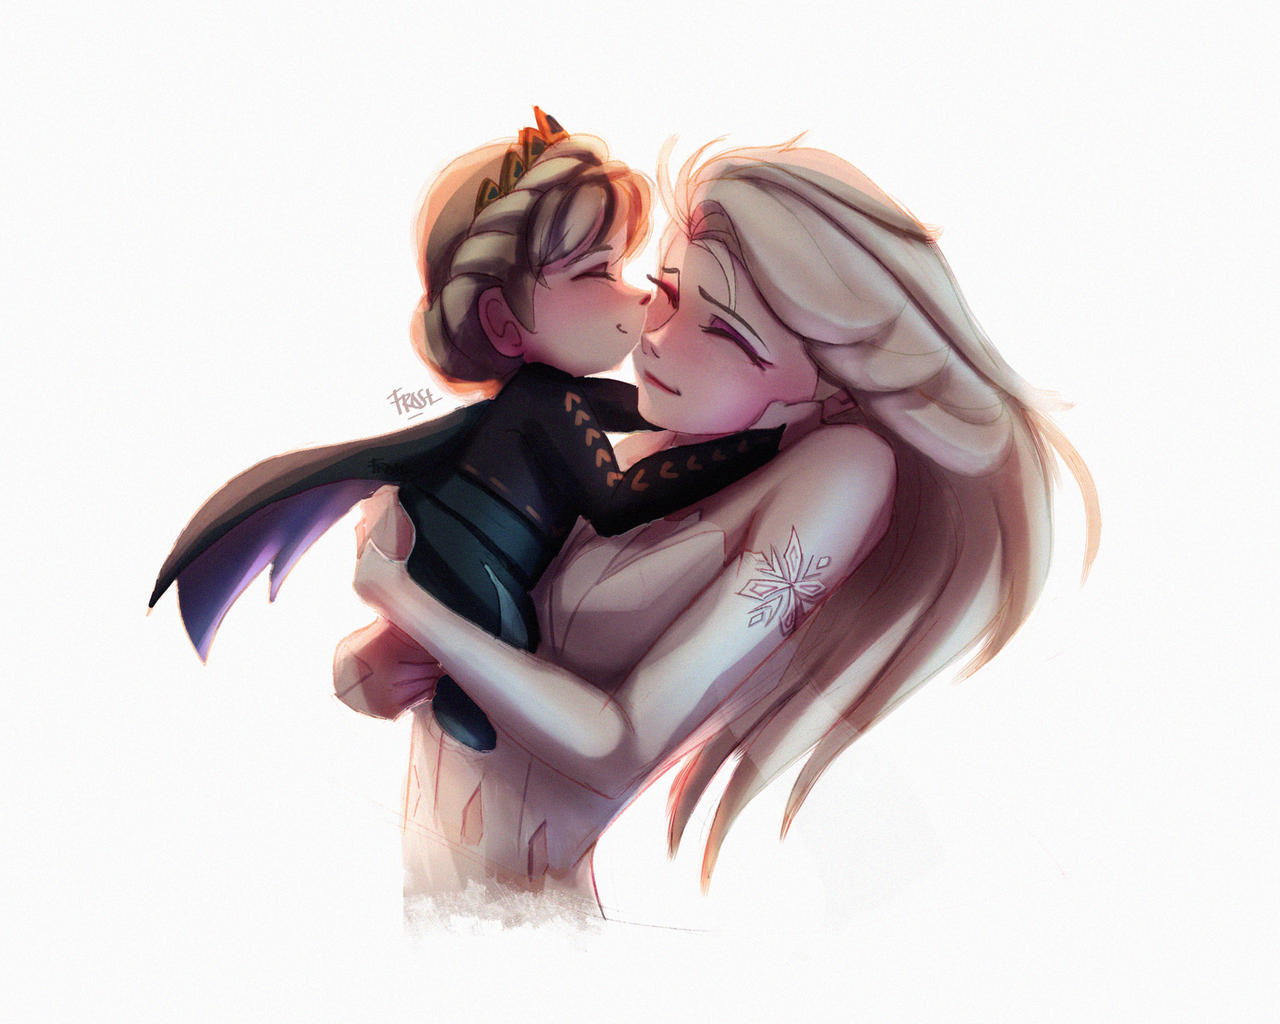 Elsa And Baby Anna by frostharmonic on DeviantArt